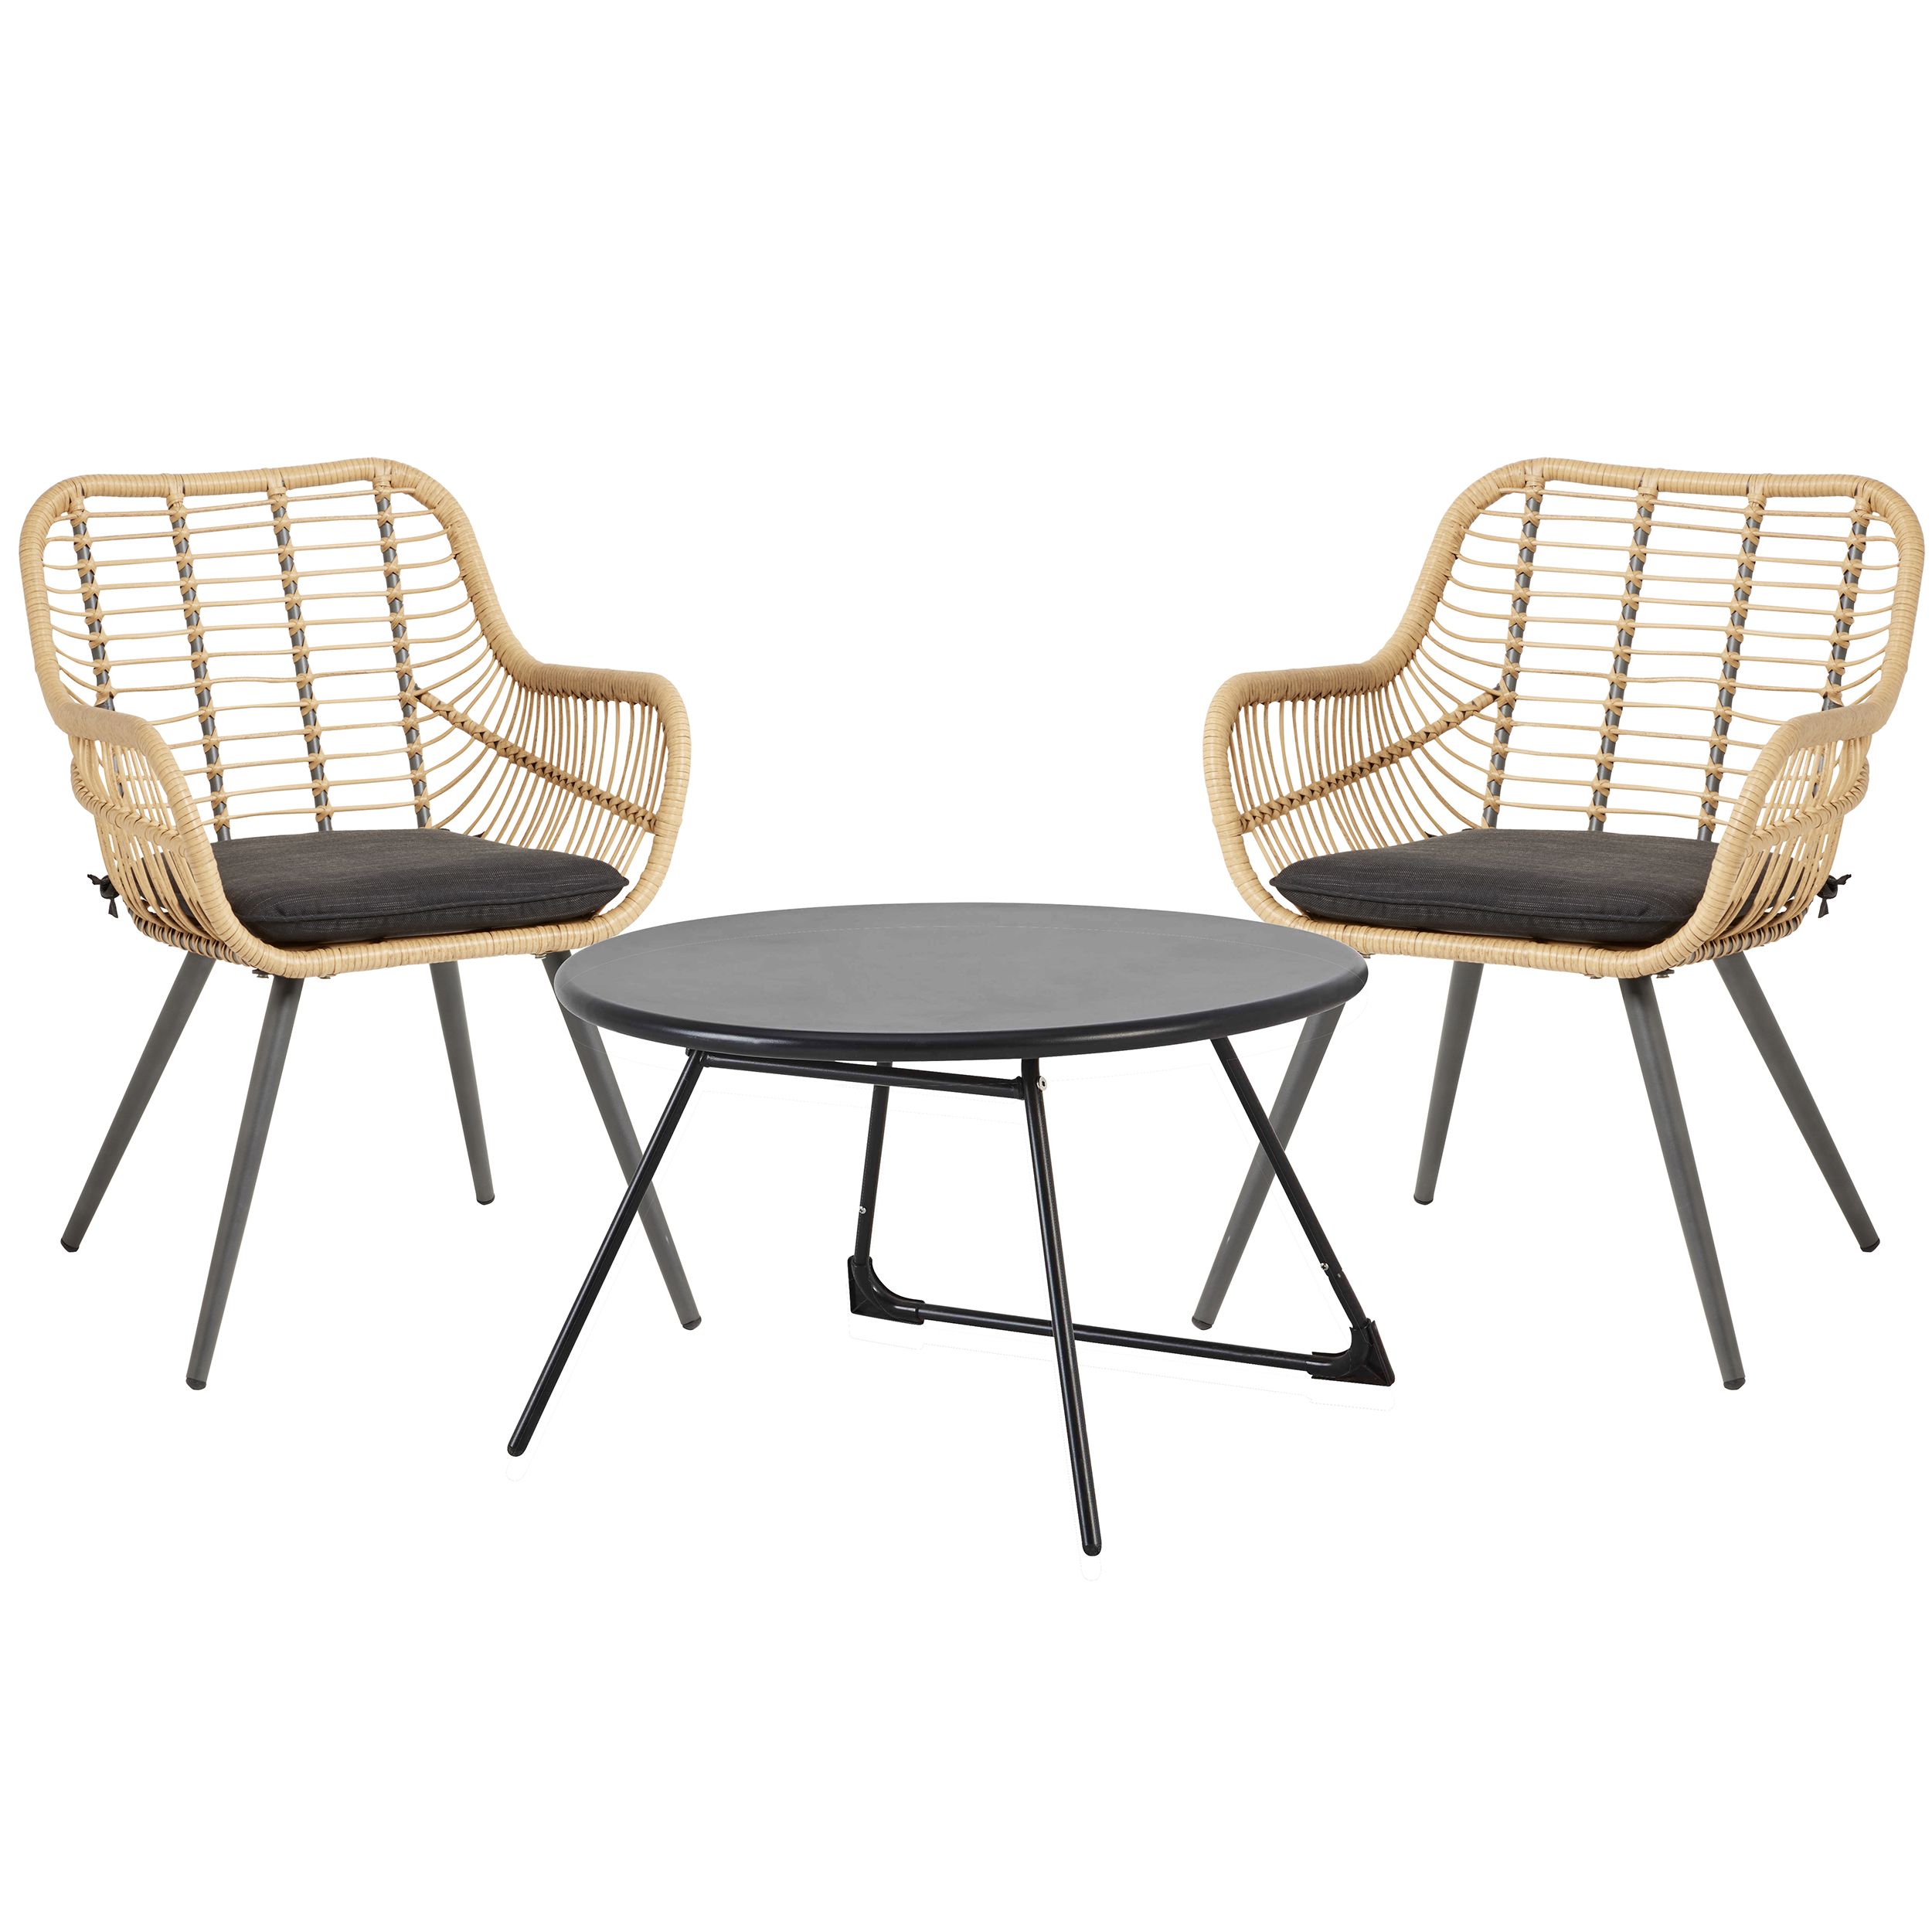 Apolima Metal 2 seater Table & chair set | Departments | DIY at B&Q